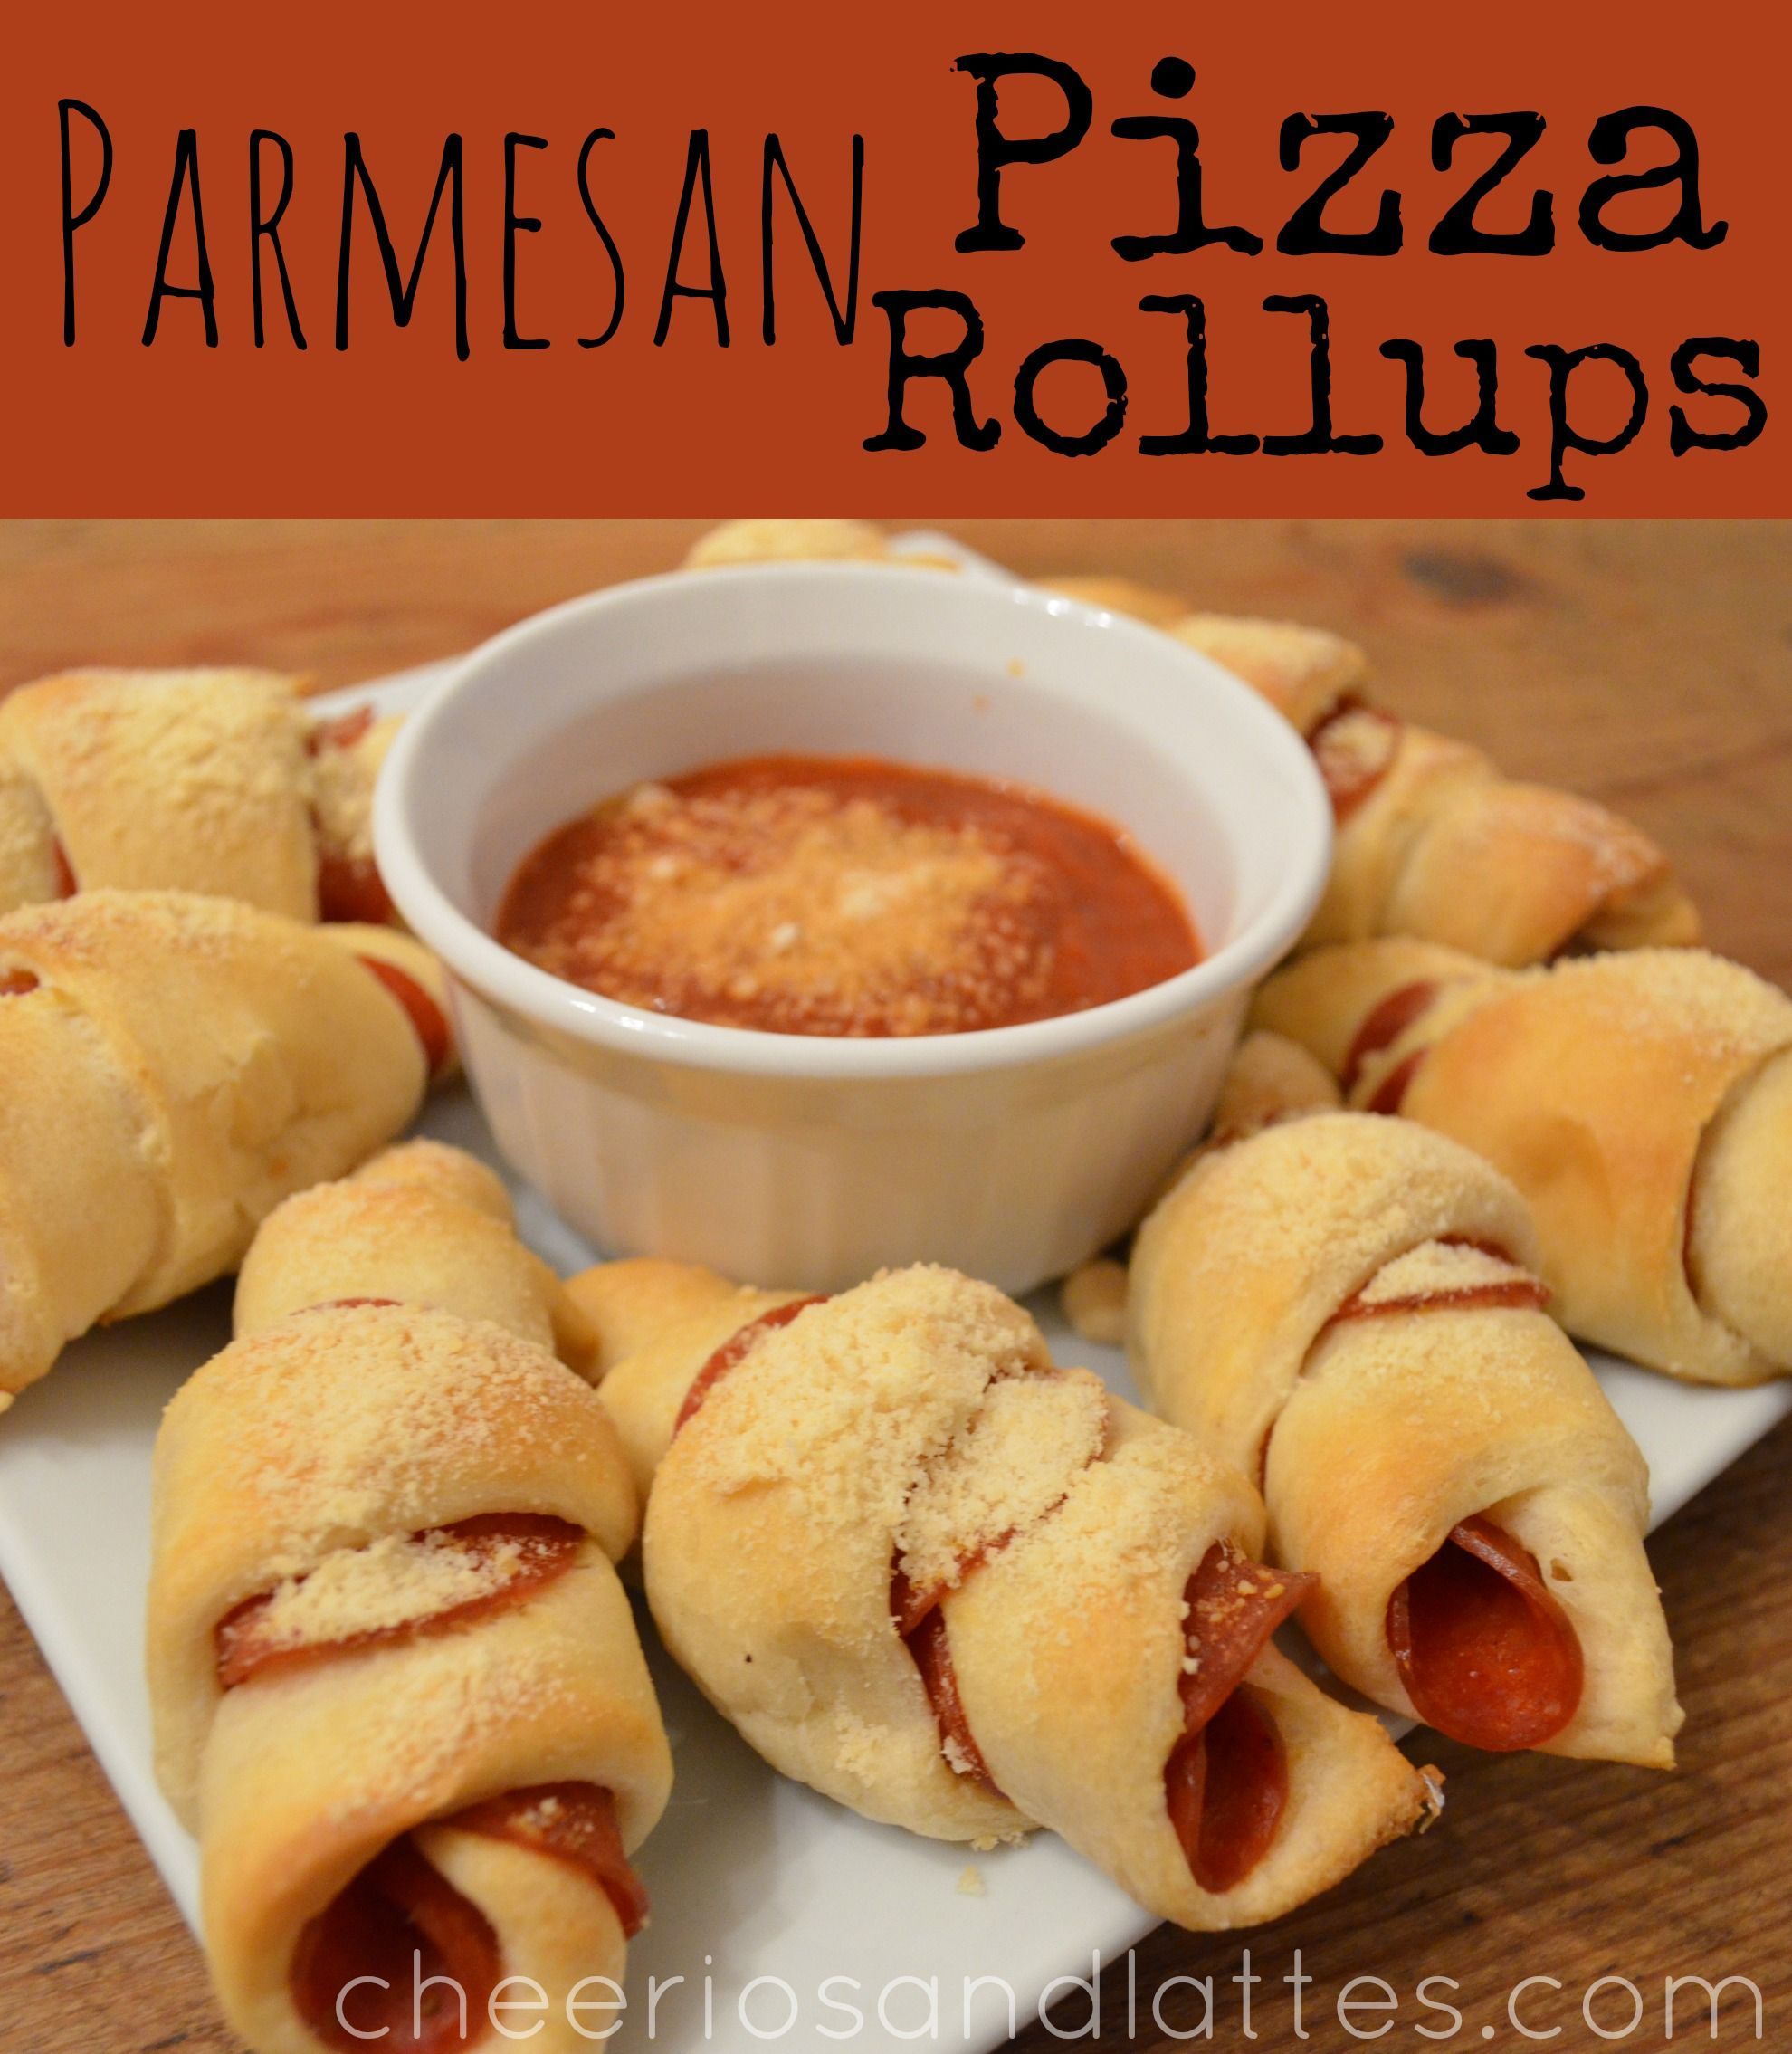 Parmesan Pizza Rollups were a signature snack my mom made for my friends and I w